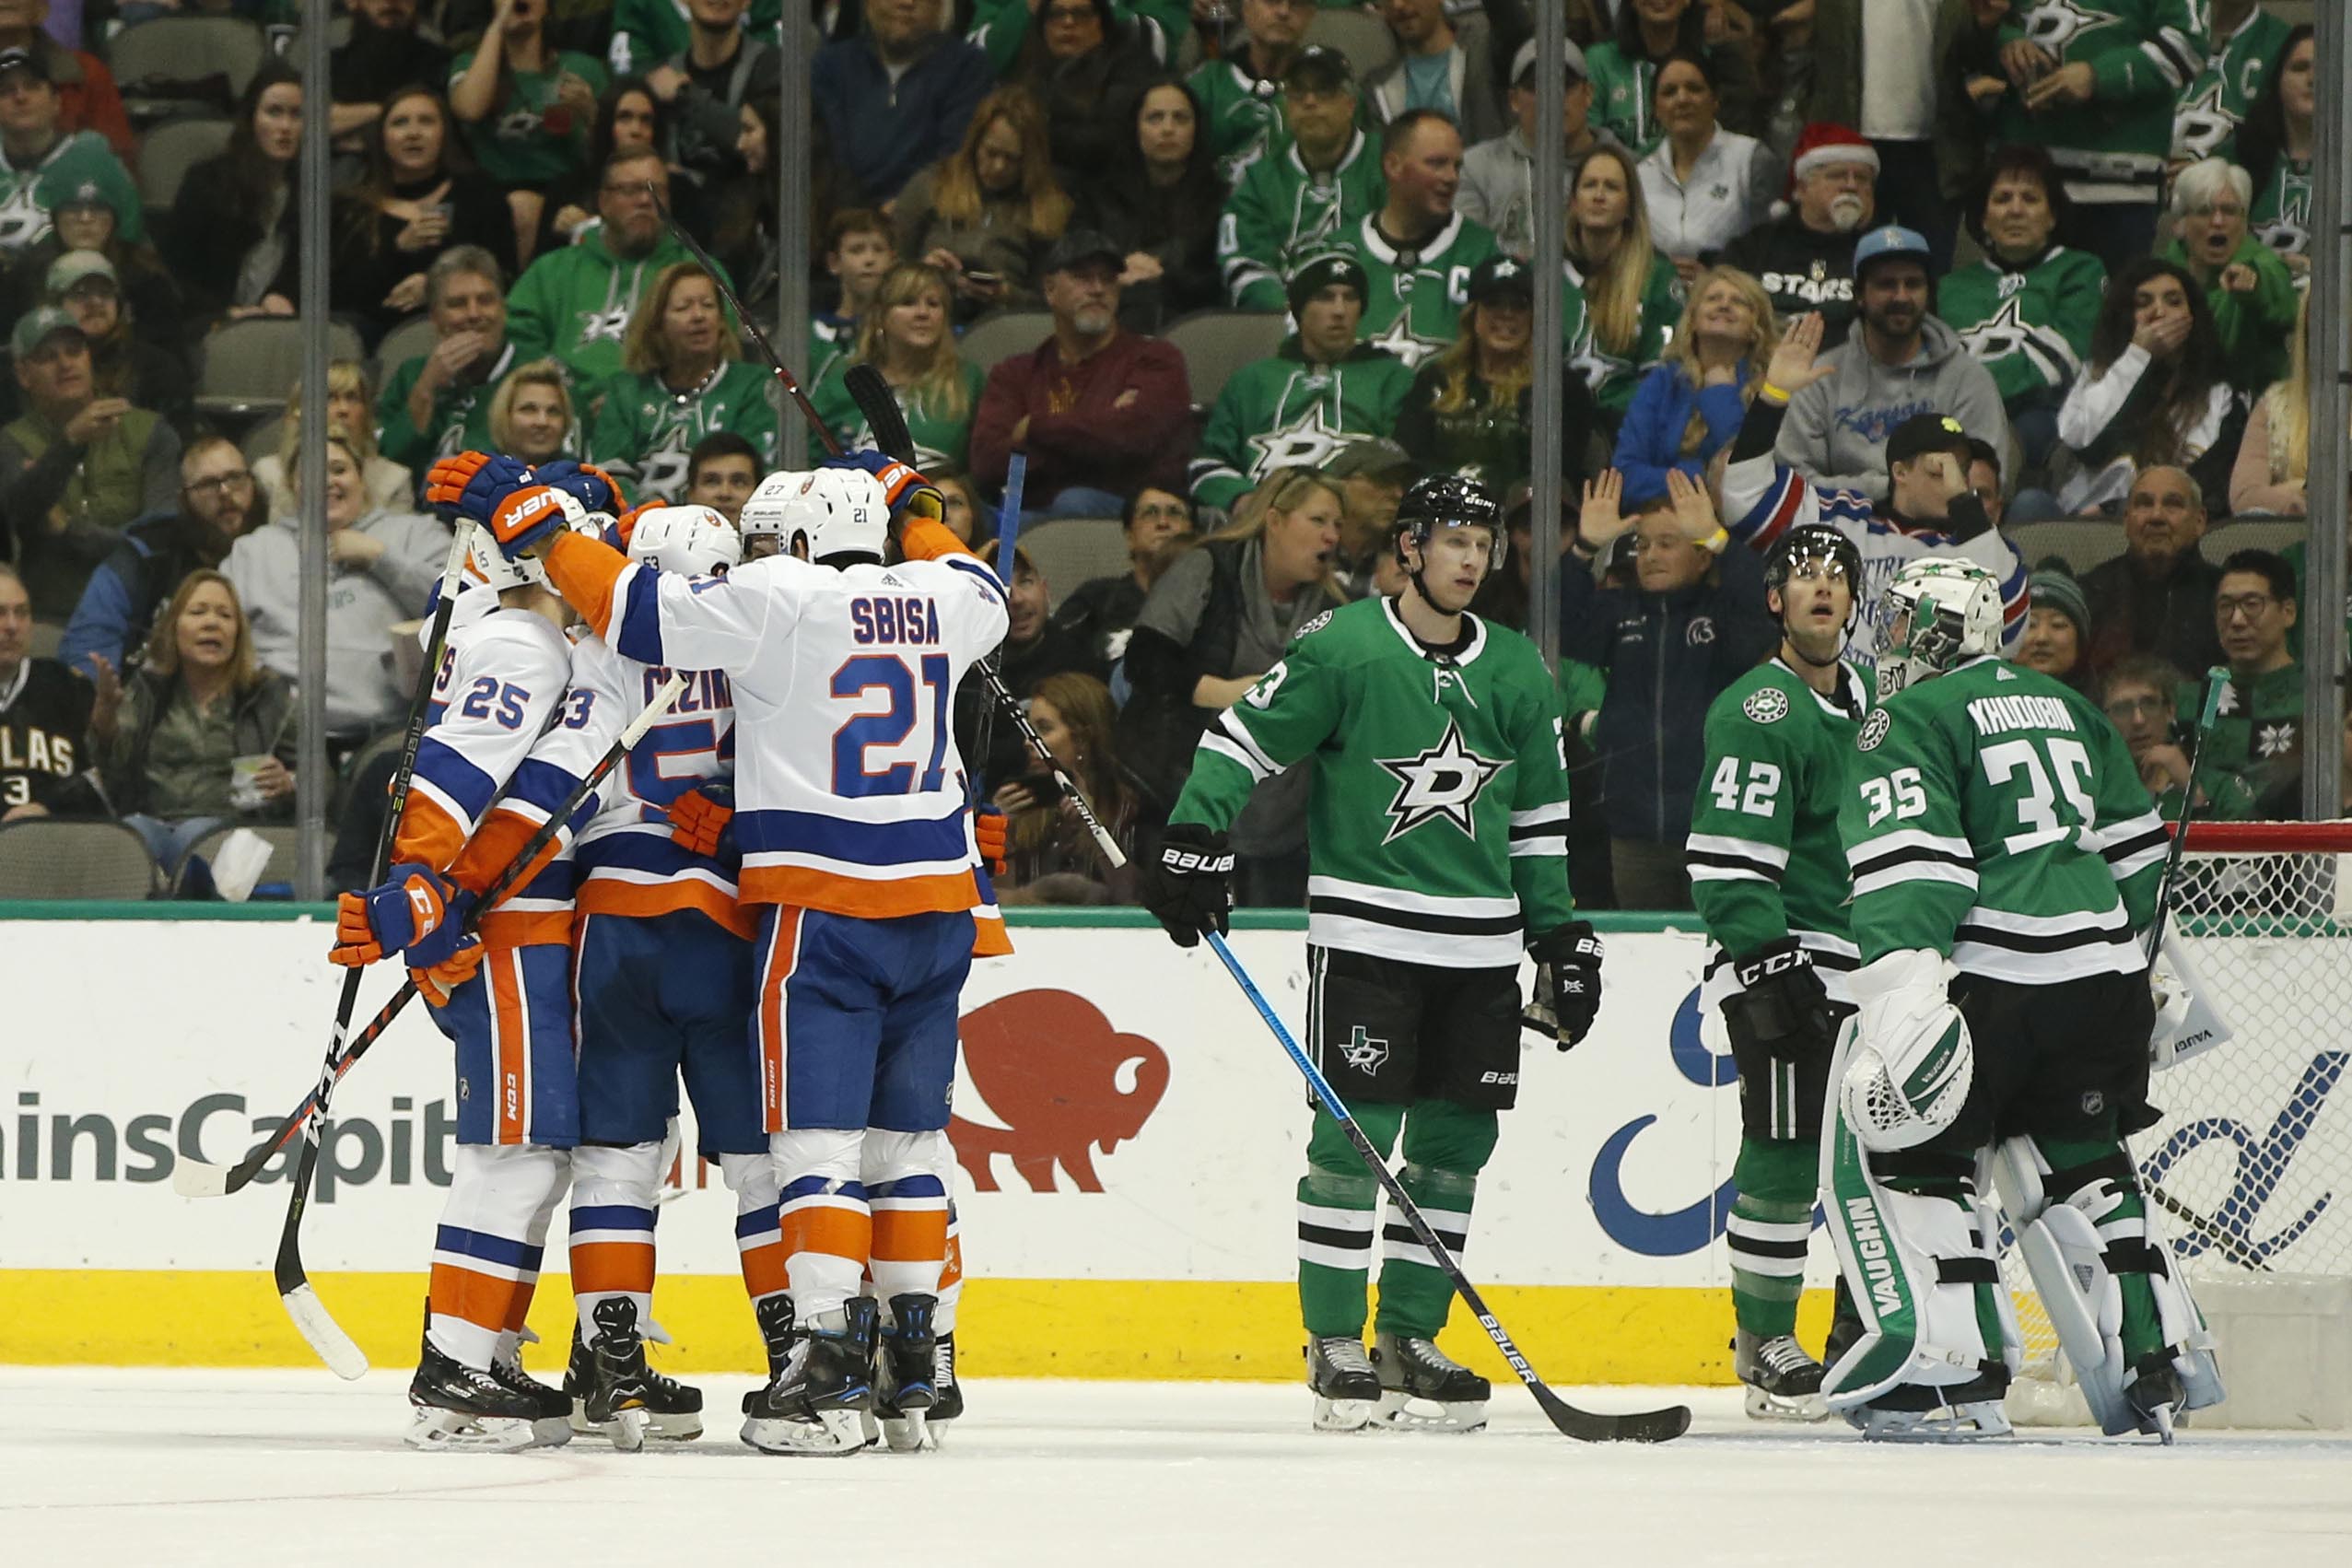 Dec 23, 2018; Dallas, TX, USA; New York Islanders celebrate a goal in the second period against the Dallas Stars at American Airlines Center. Mandatory Credit: Tim Heitman-USA TODAY Sports